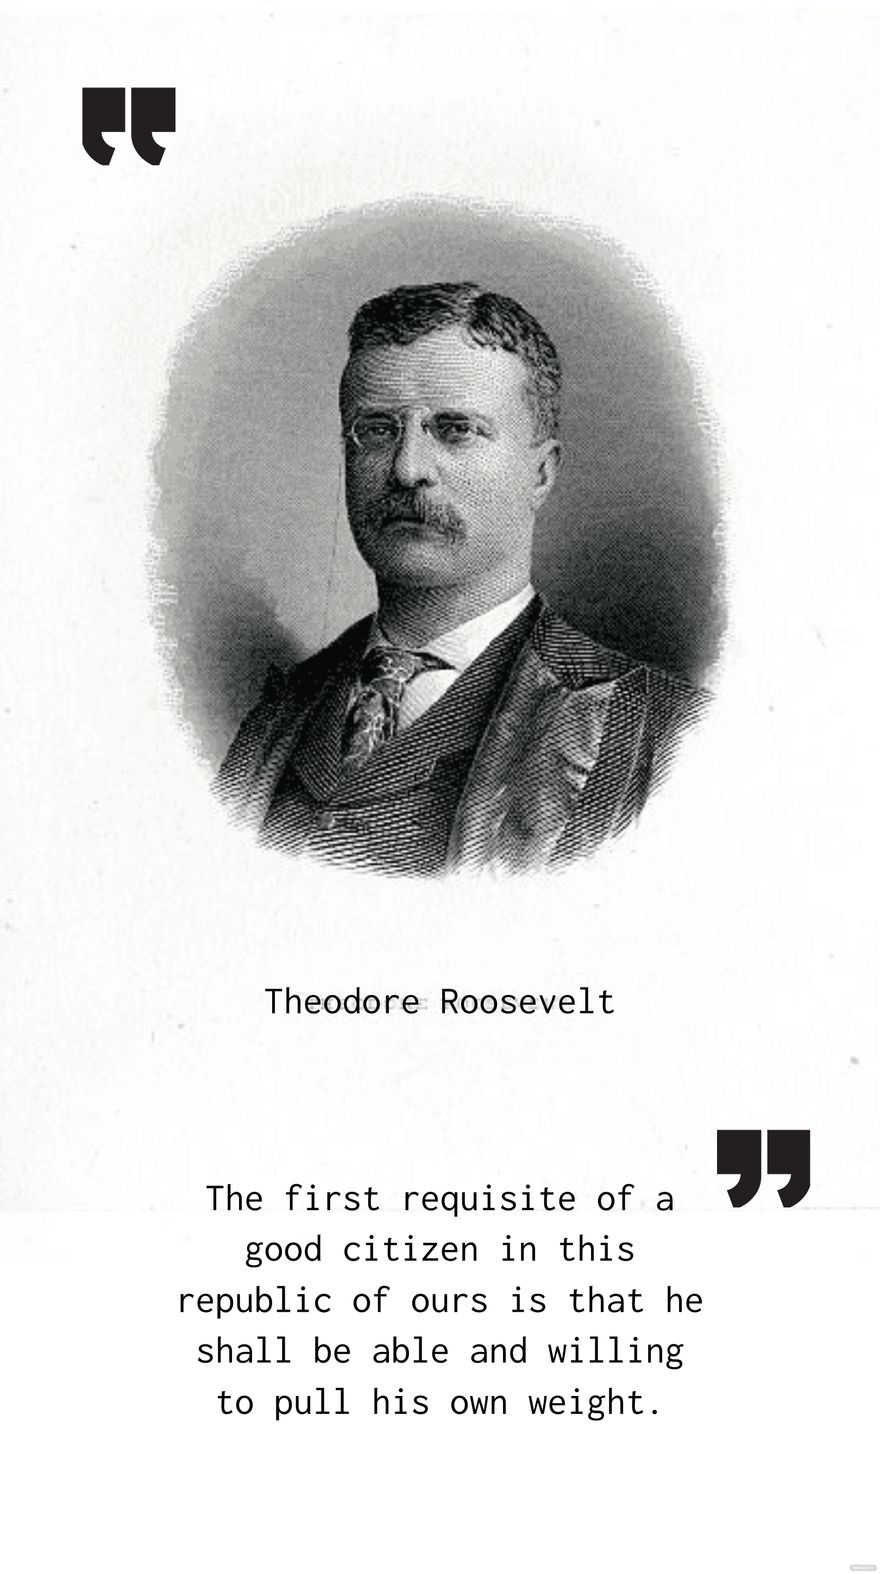 Free The first requisite of a good citizen in this republic of ours is that he shall be able and willing to pull his own weight. - Theodore Roosevelt